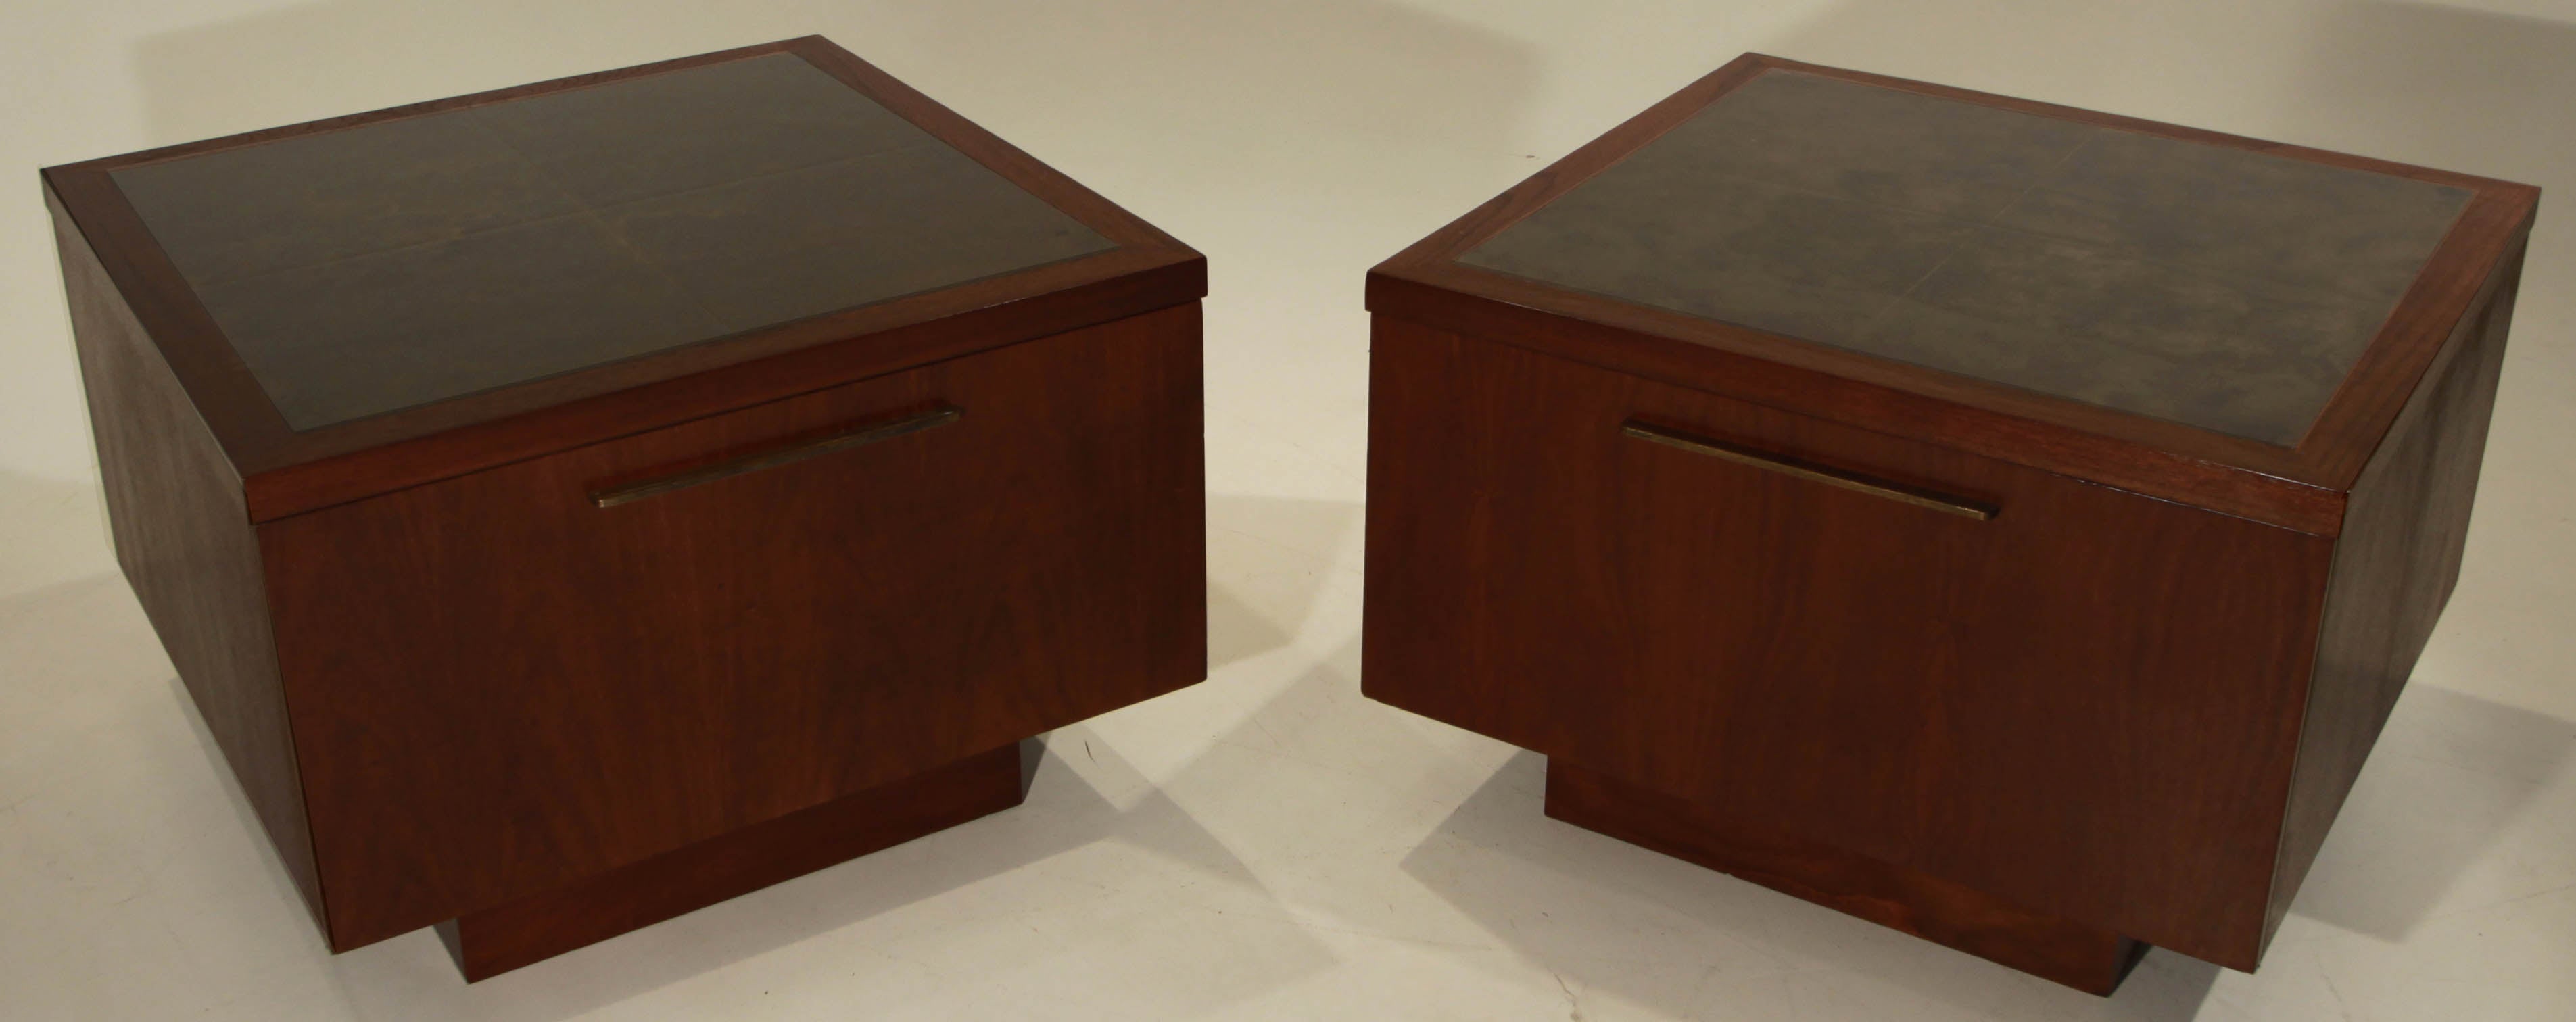 Pair of Large Walnut and Bronze End Tables by Harry Lunstead